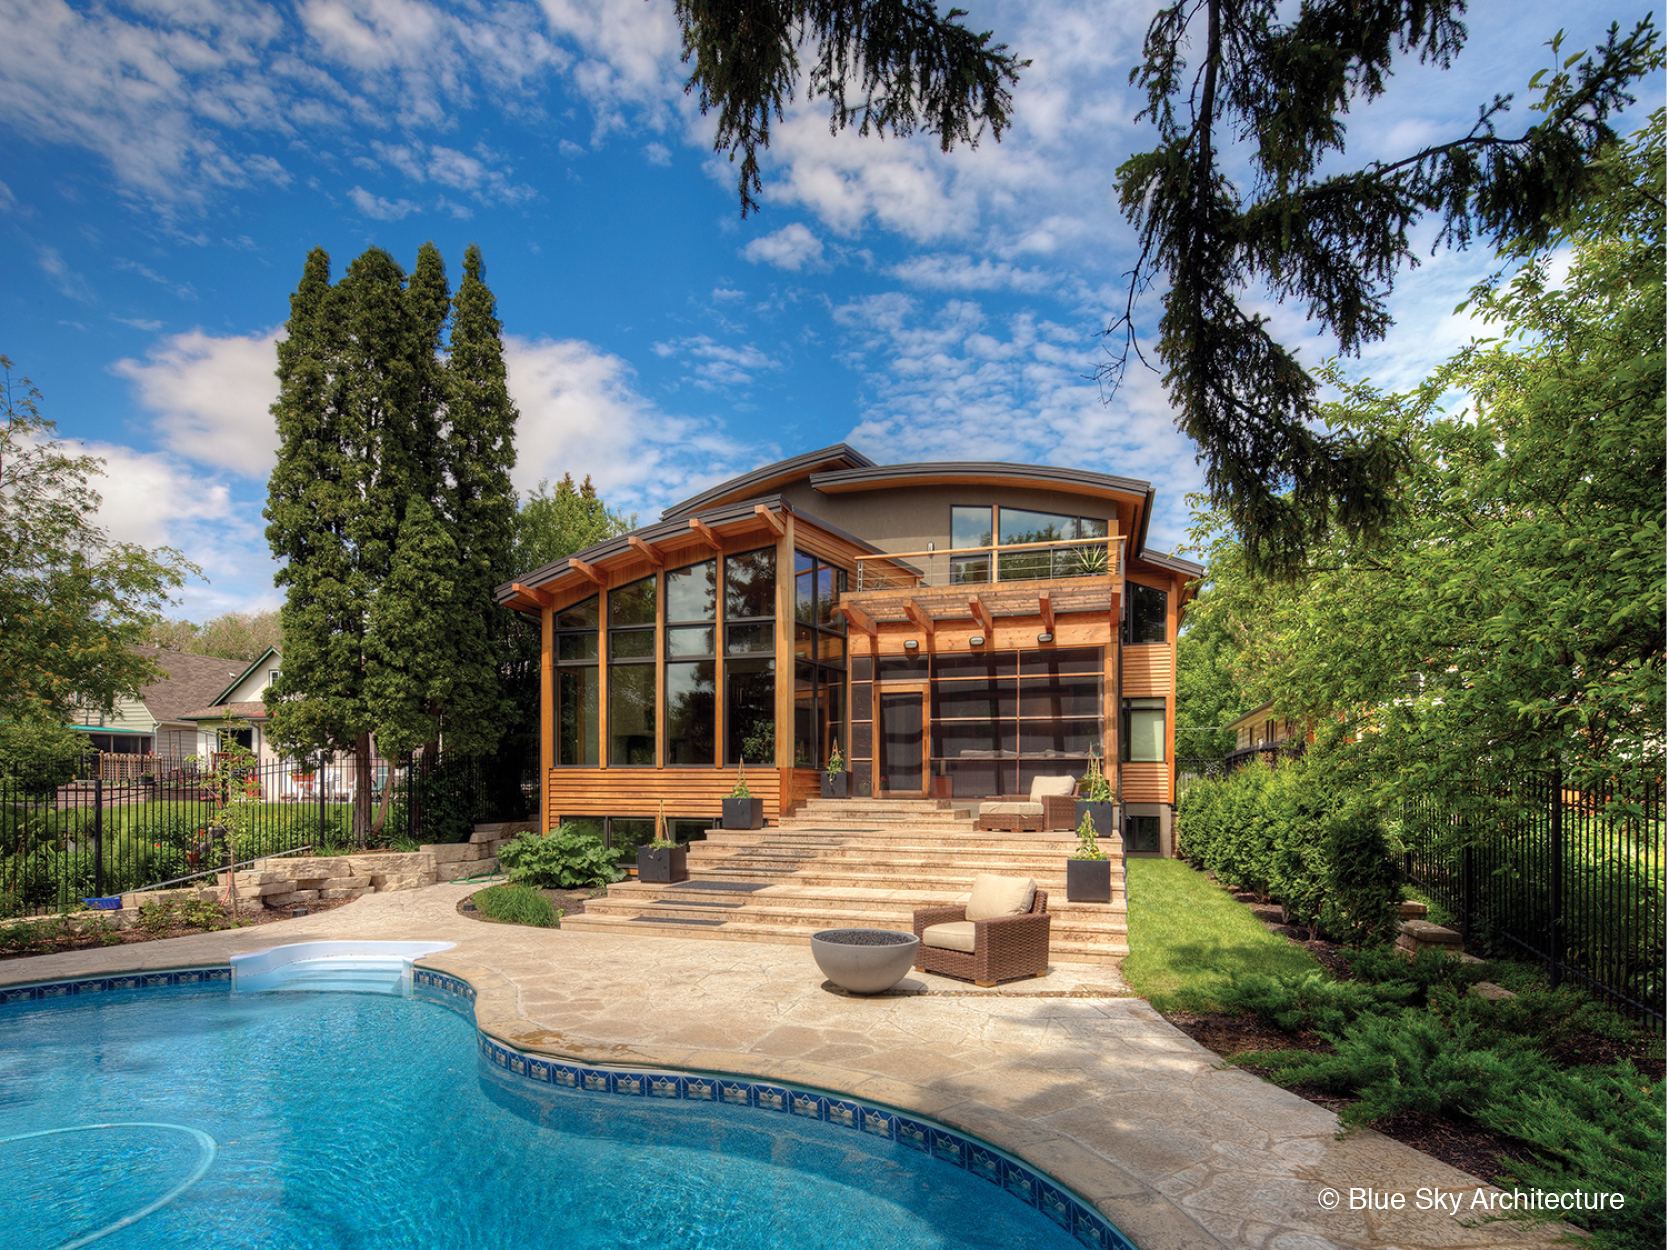 Assiniboine River house's organic architecture exterior, with terrace and pool